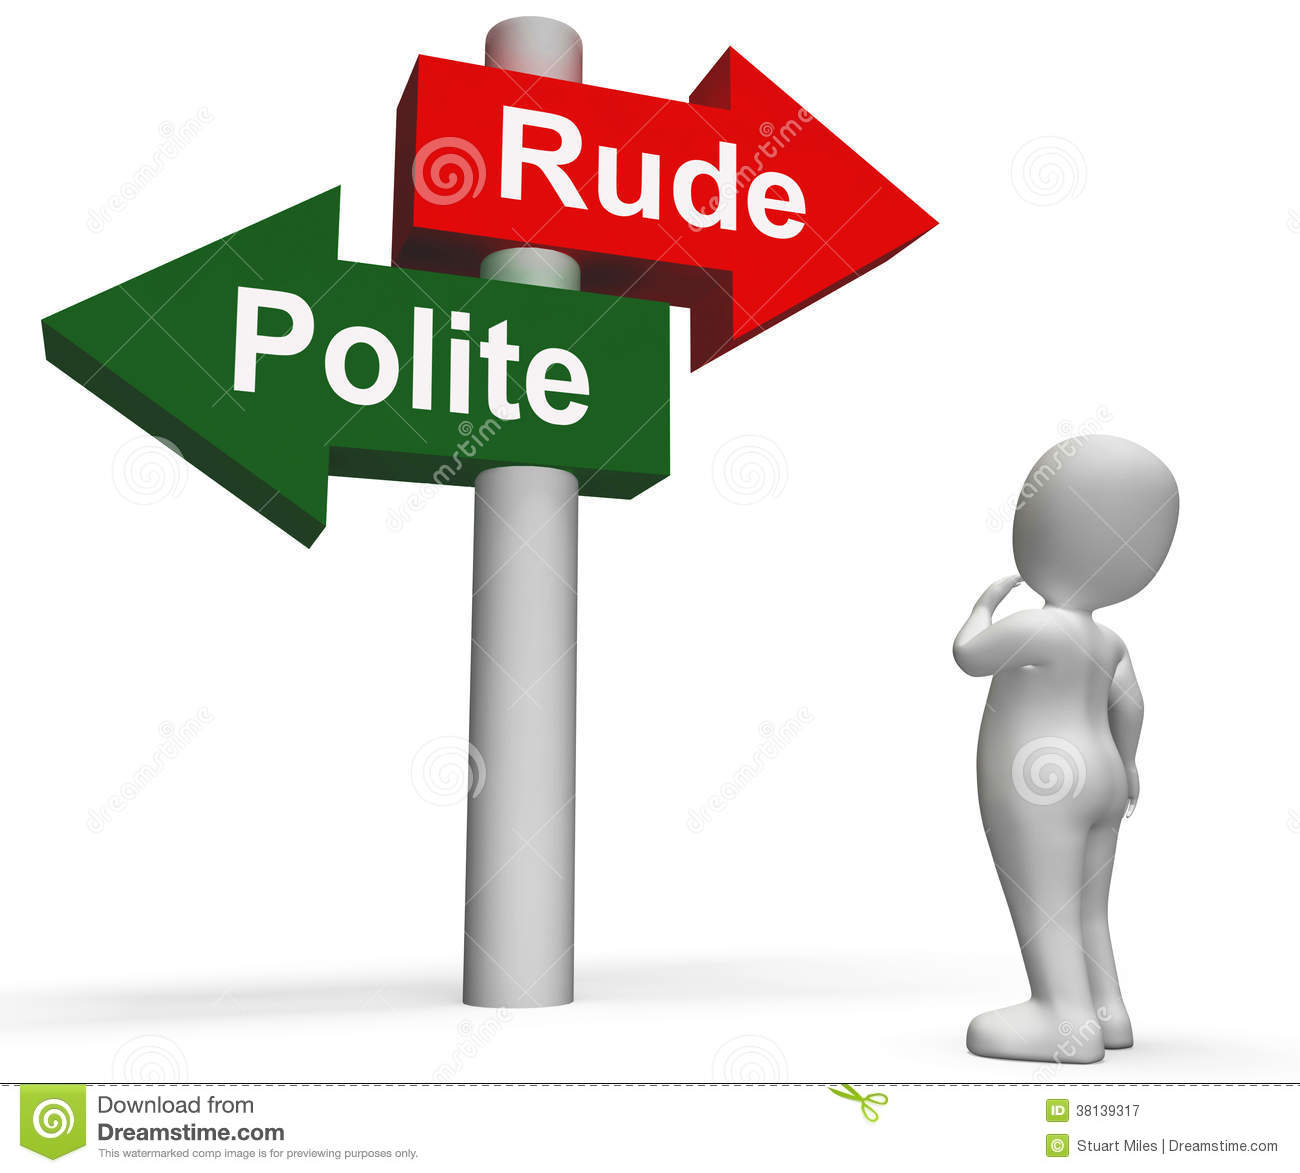 Free Stock Photography  Rude Polite Signpost Means Good Bad Manners